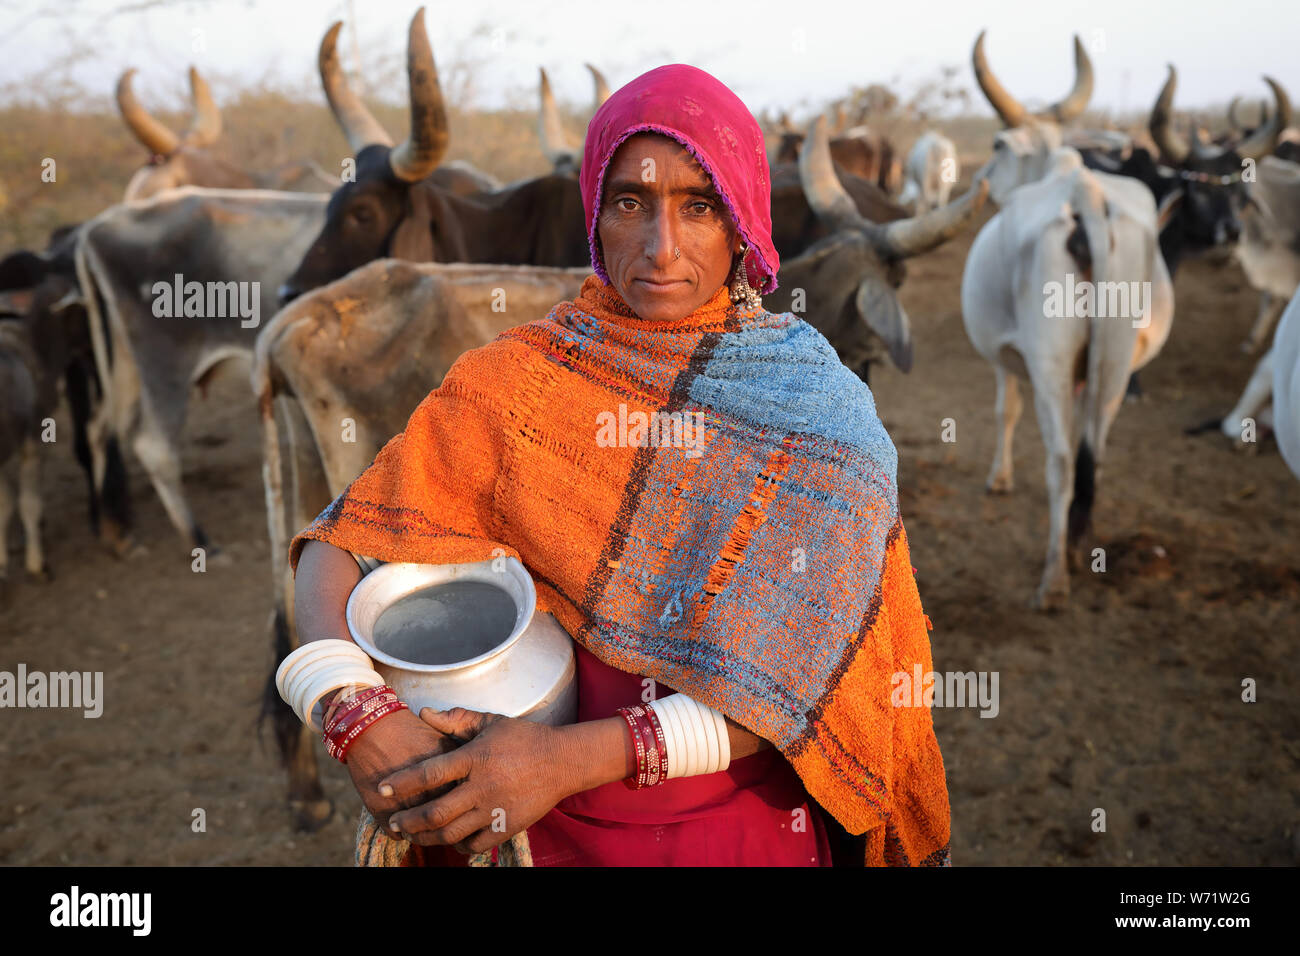 Rabari woman in a rural village in the district of Kutch, Gujarat. The Kutch region is well known for its tribal life and traditional culture. Stock Photo